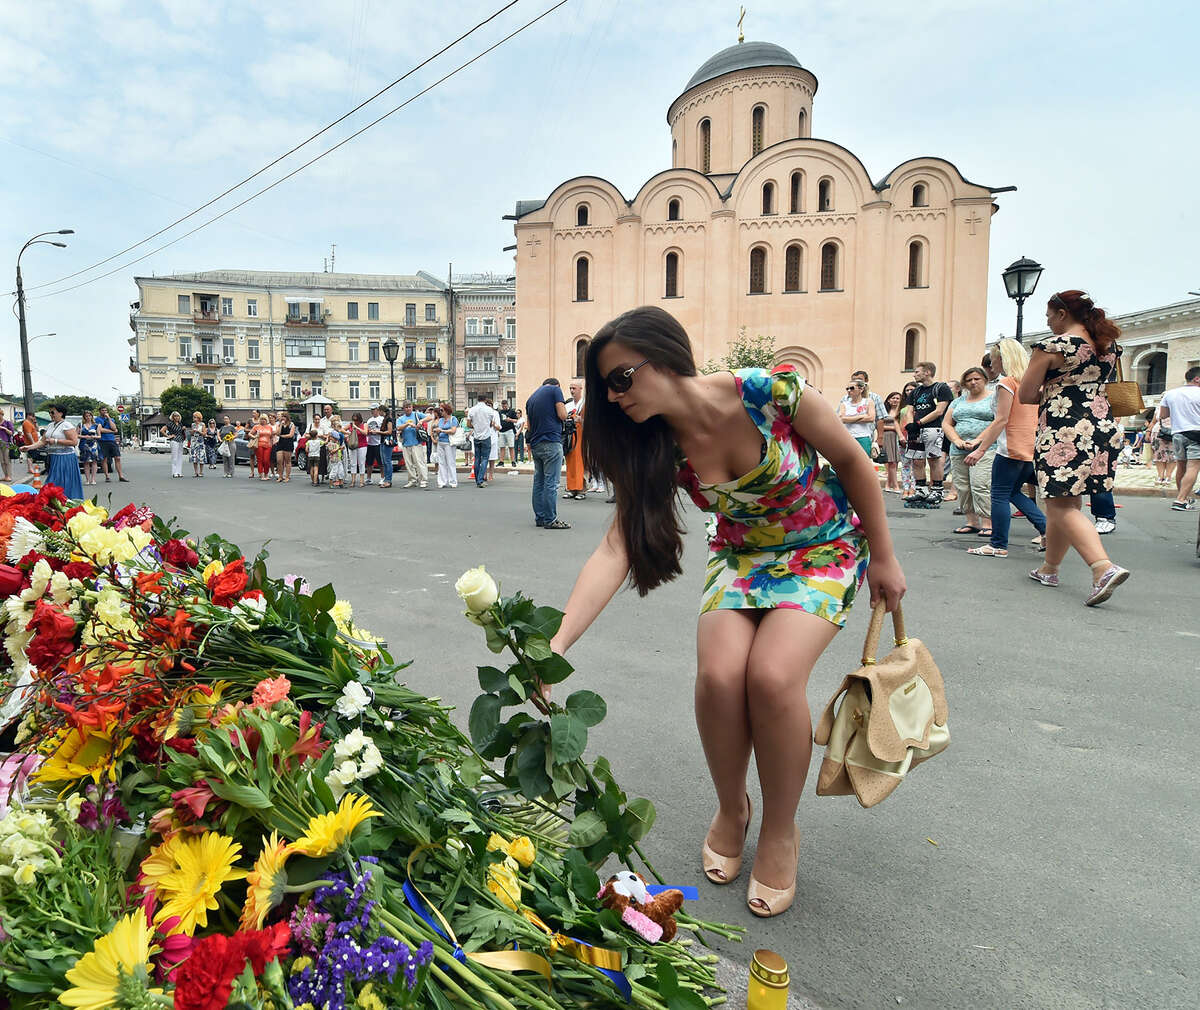 A girl lay flowers as people lay flowers and light candles in front of the Embassy of the Netherlands in Kiev on July 18, 2014, to commemorate passengers of Malaysia Airlines flight MH17 carrying 295 people from Amsterdam to Kuala Lumpur which crashed in eastern Ukraine. Ukraine's prime minister said Friday that pro-Russian separatist rebels that Kiev believes shot down a Malaysian airliner with 298 people on board should face an international tribunal The Hague.